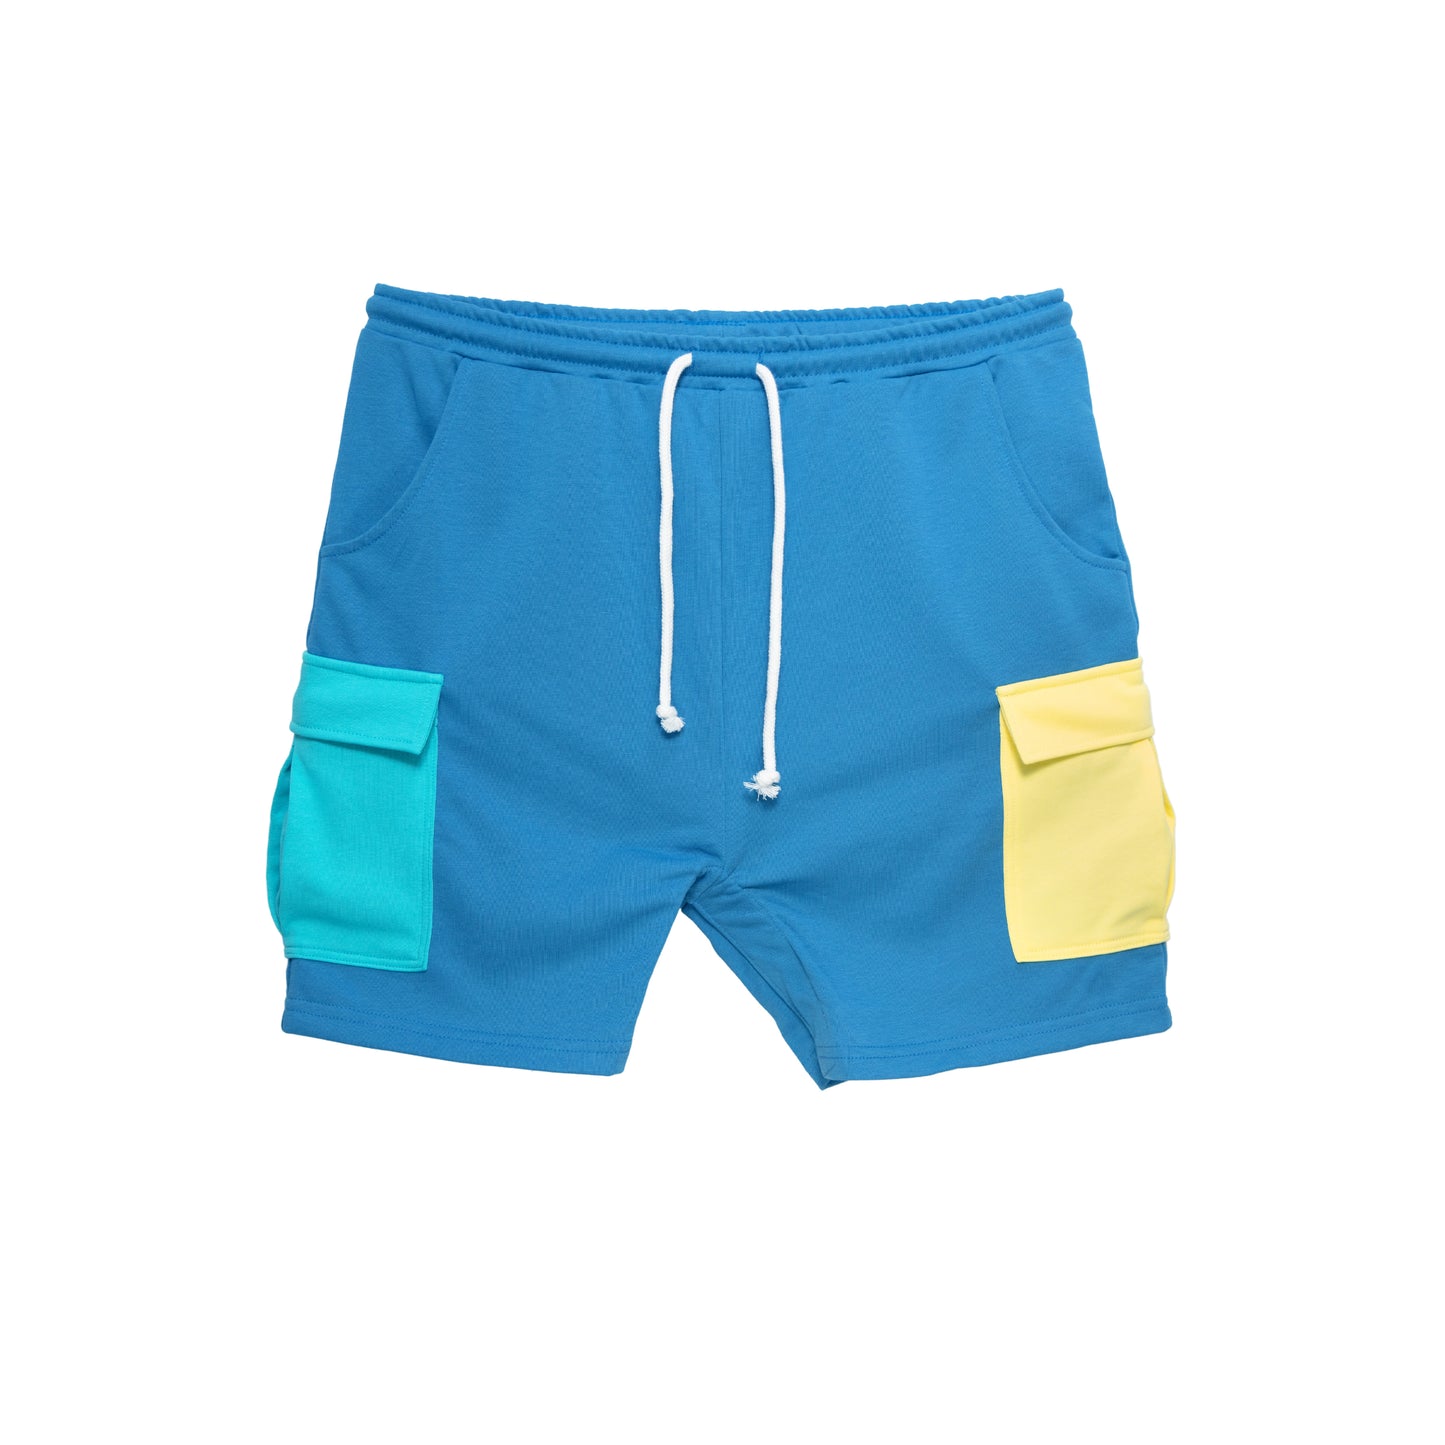 Hook & Loop Shorts - Baby Blue (Limited Edition)